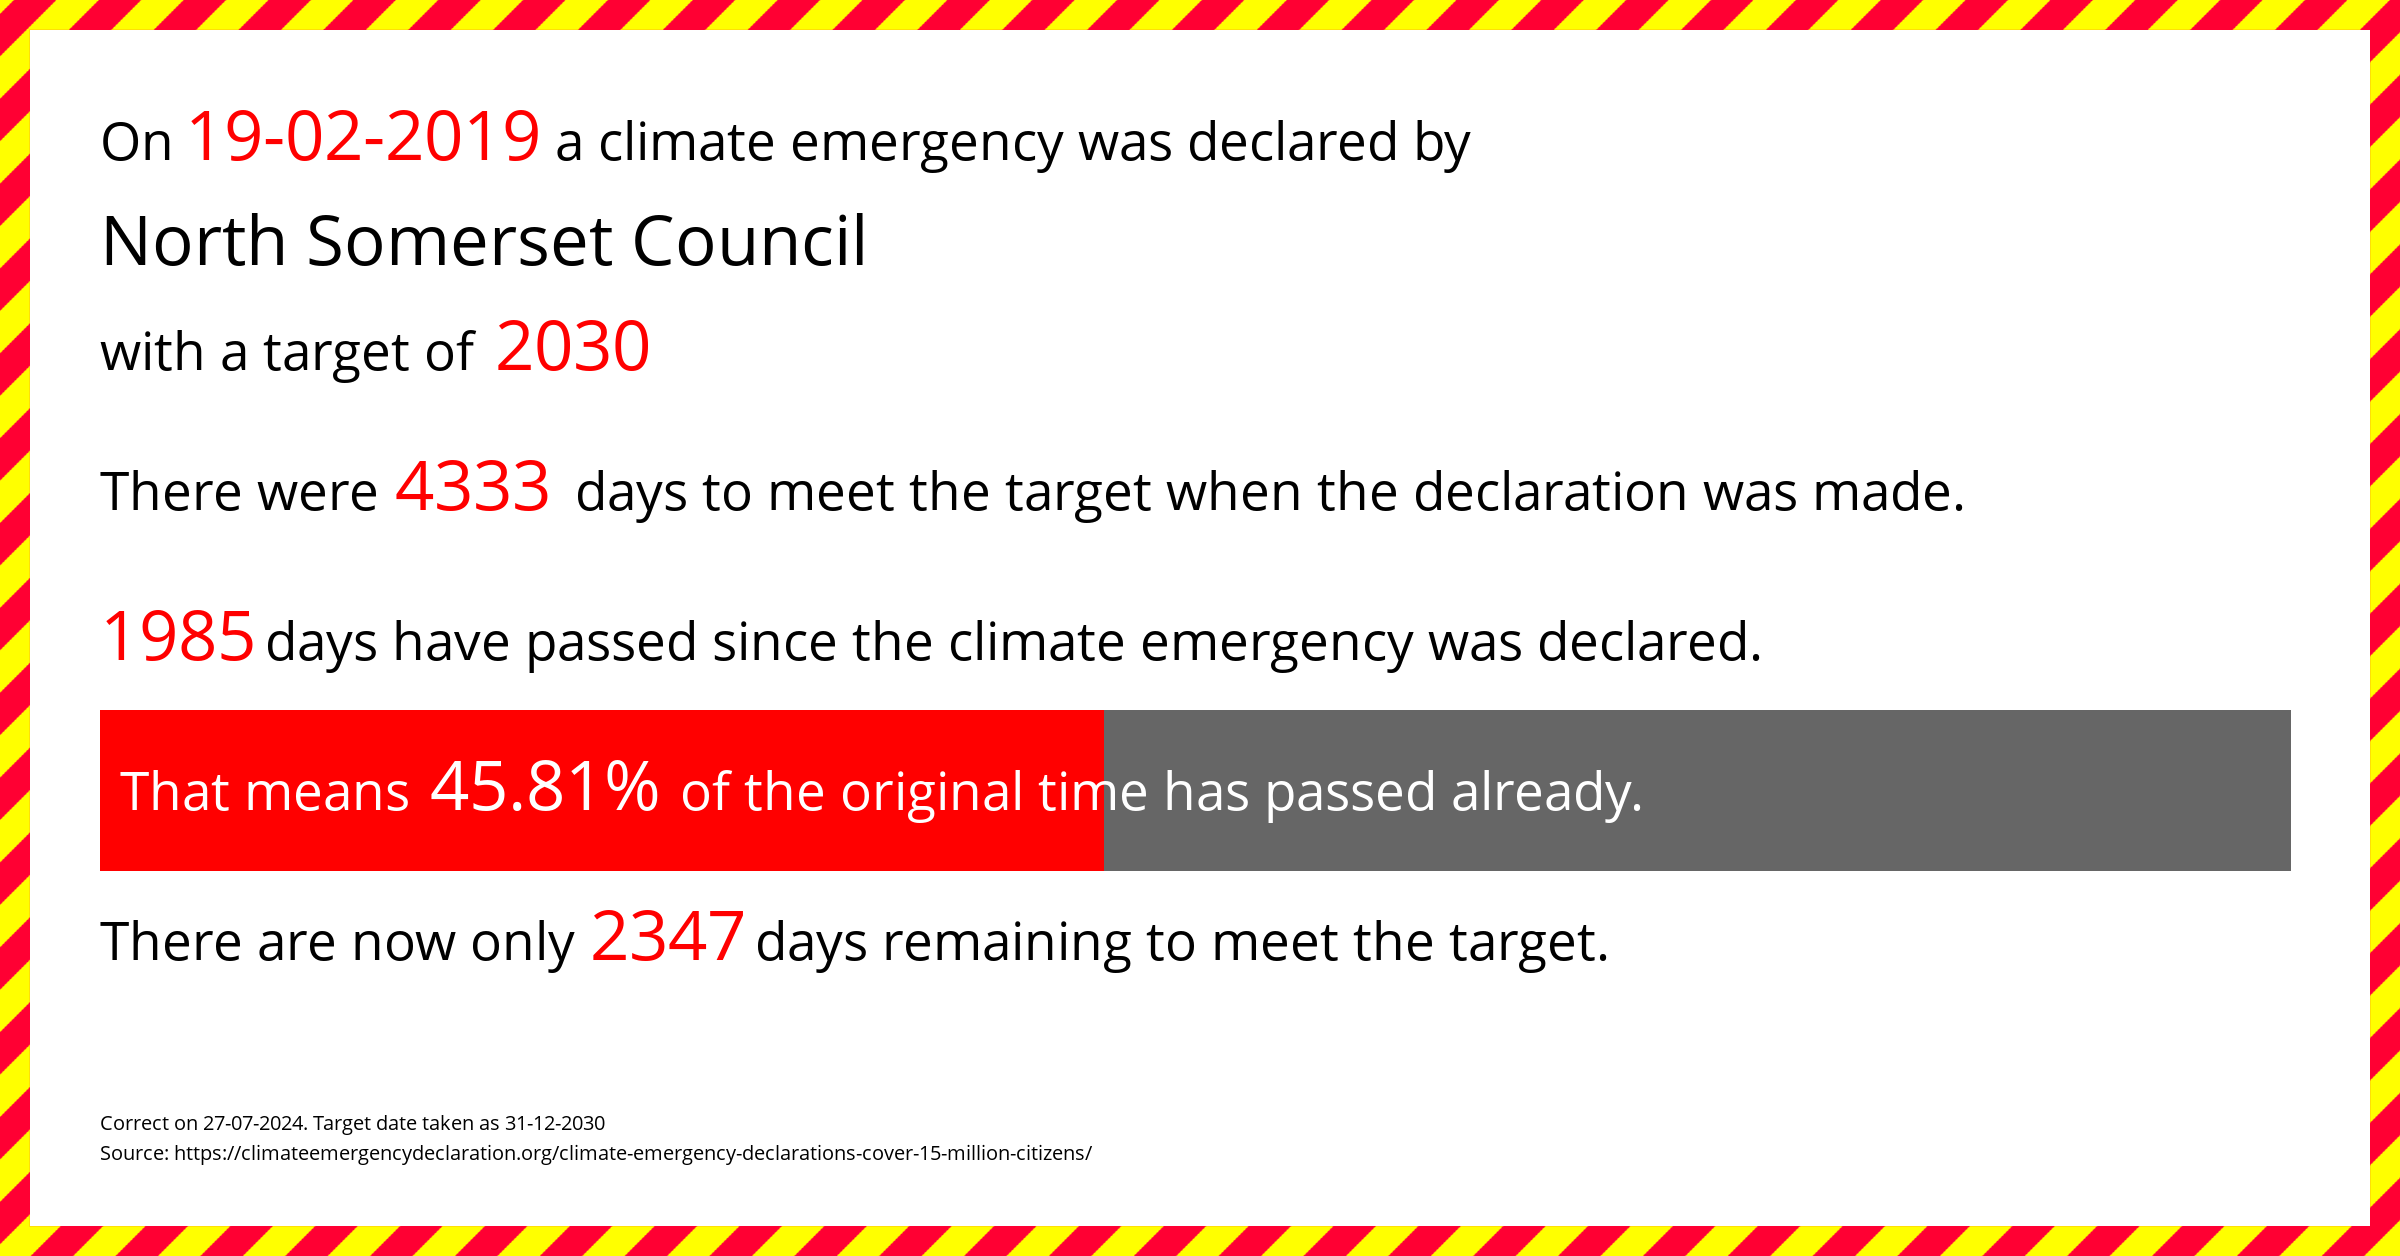 North Somerset Council declared a Climate emergency on Tuesday 19th February 2019, with a target of 2030.